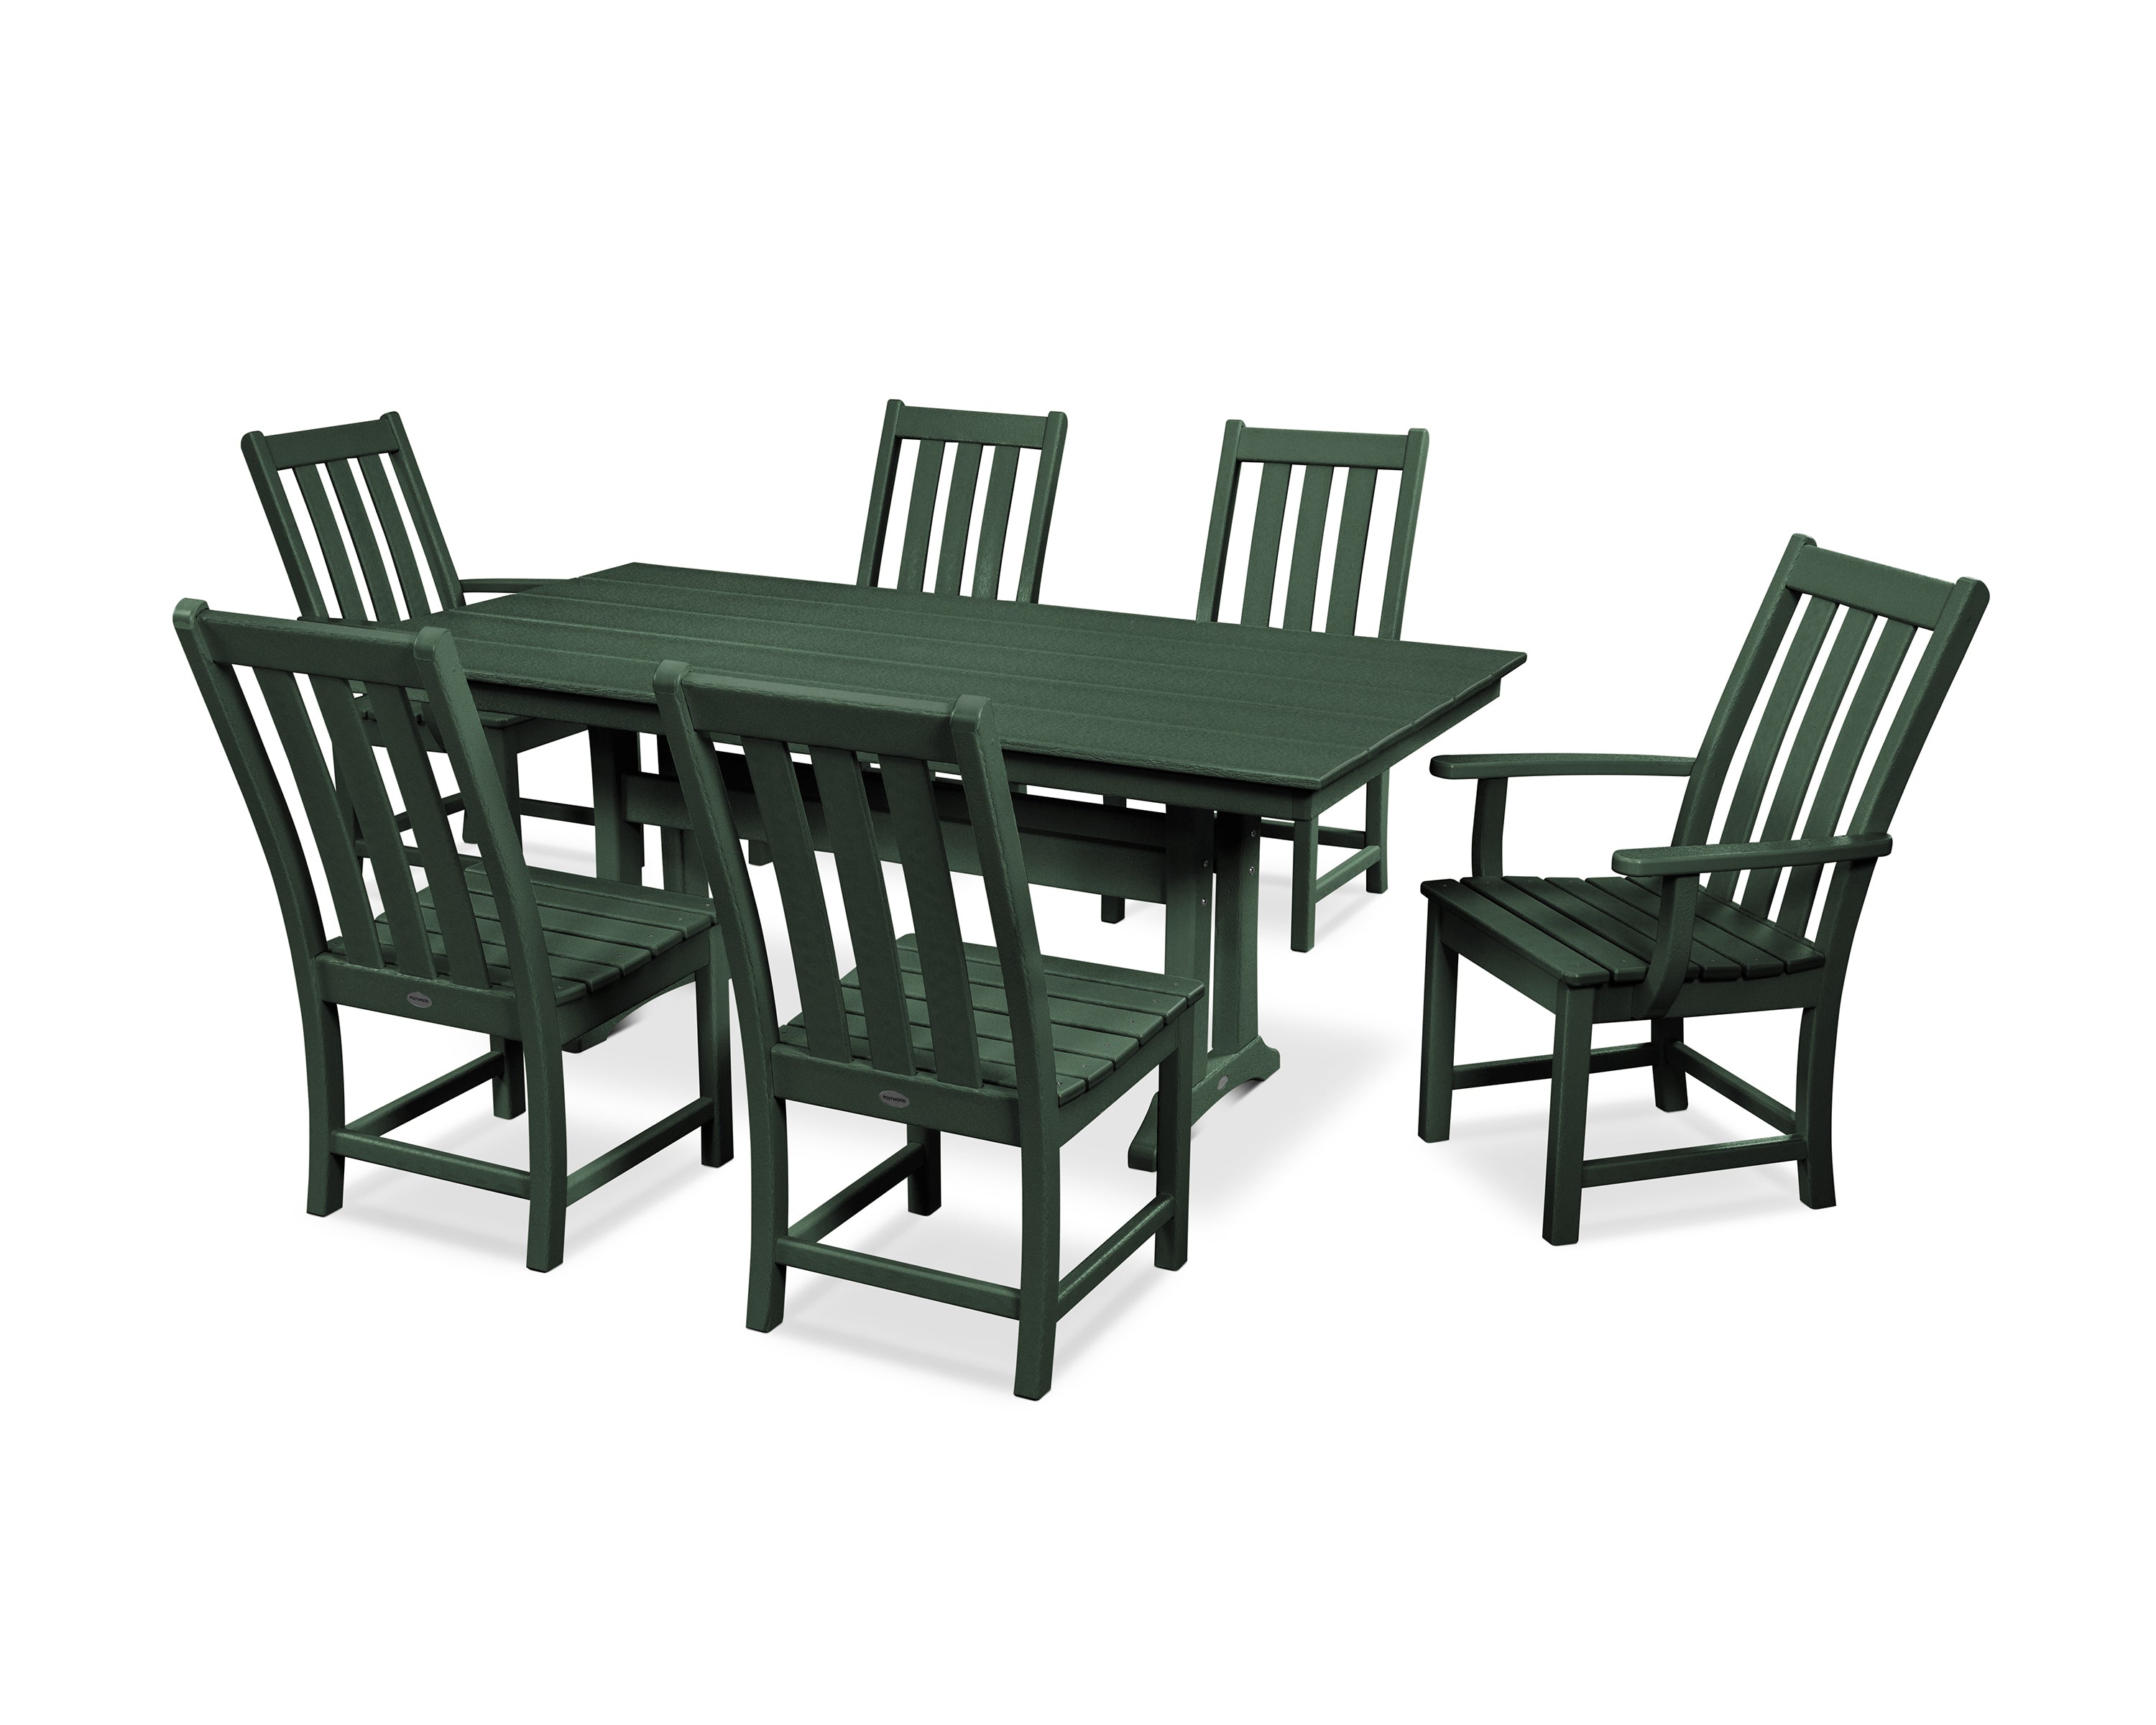 POLYWOOD® Vineyard 7-Piece Farmhouse Dining Set with Trestle Legs in Green